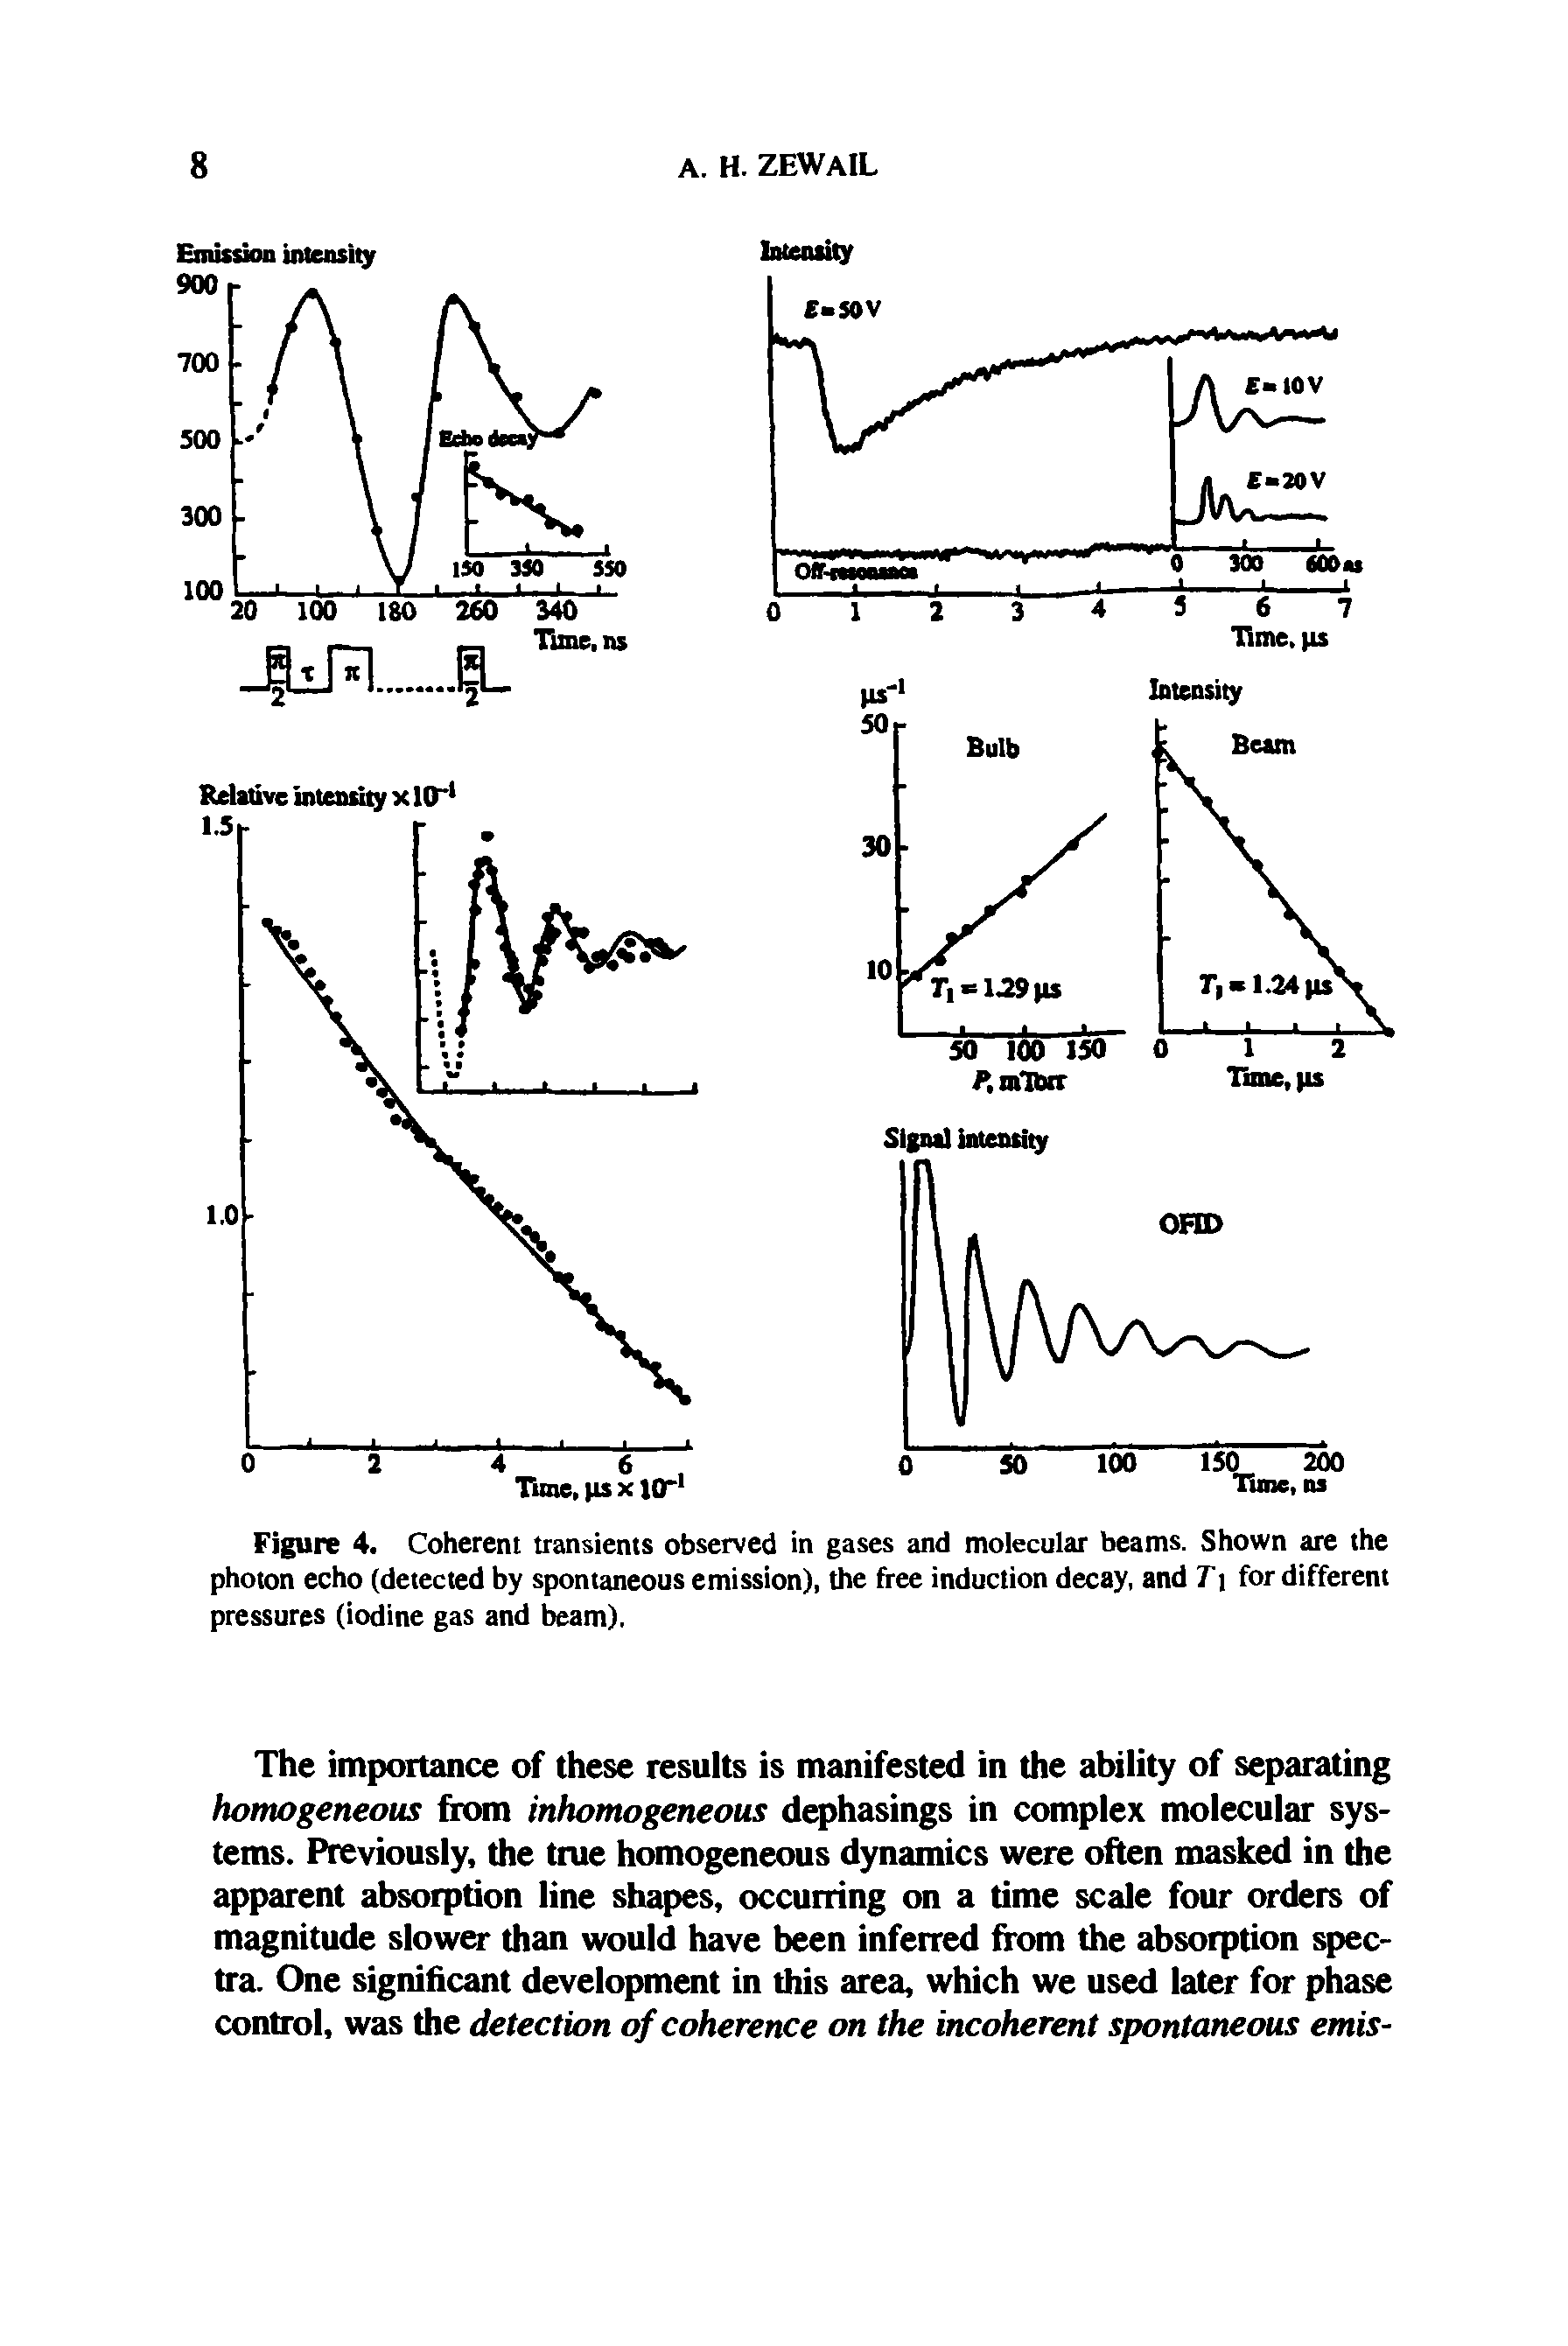 Figure 4. Coherent transients observed in gases and molecular beams. Shown are the photon echo (detected by spontaneous emission), the free induction decay, and Ti for different pressures (iodine gas and beam).